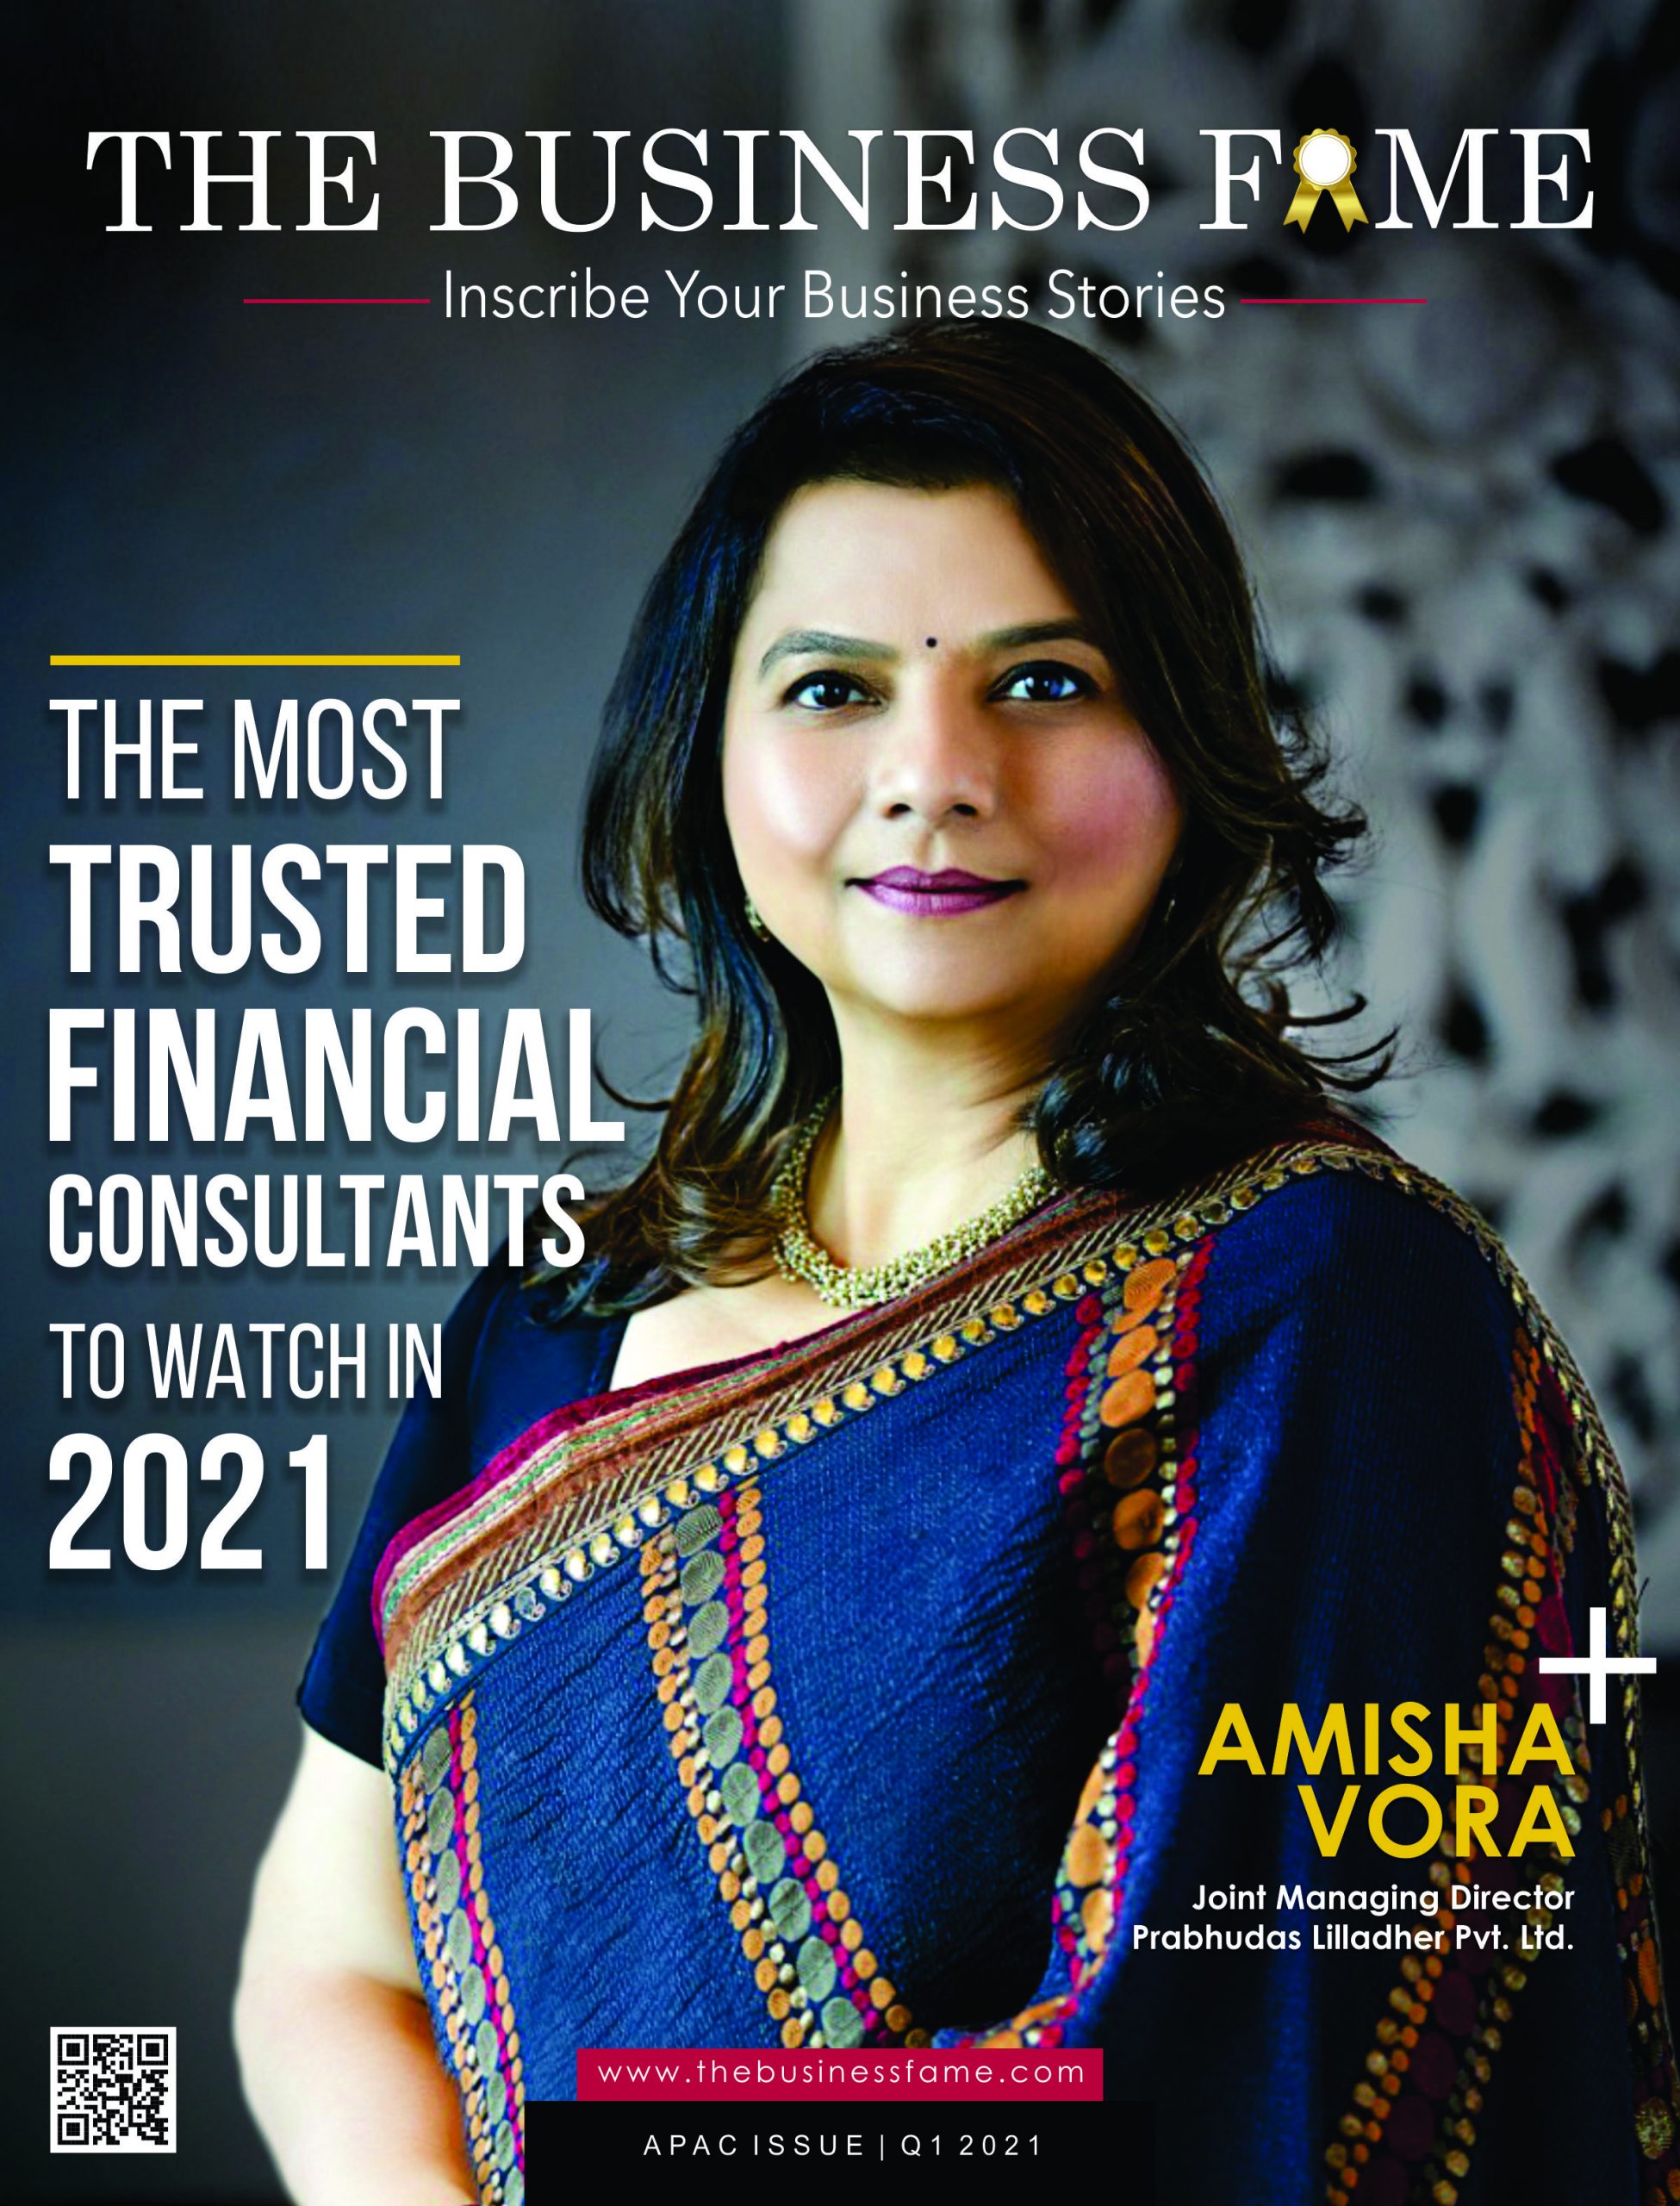 The Most Trusted Financial Consultants to watch in 2021